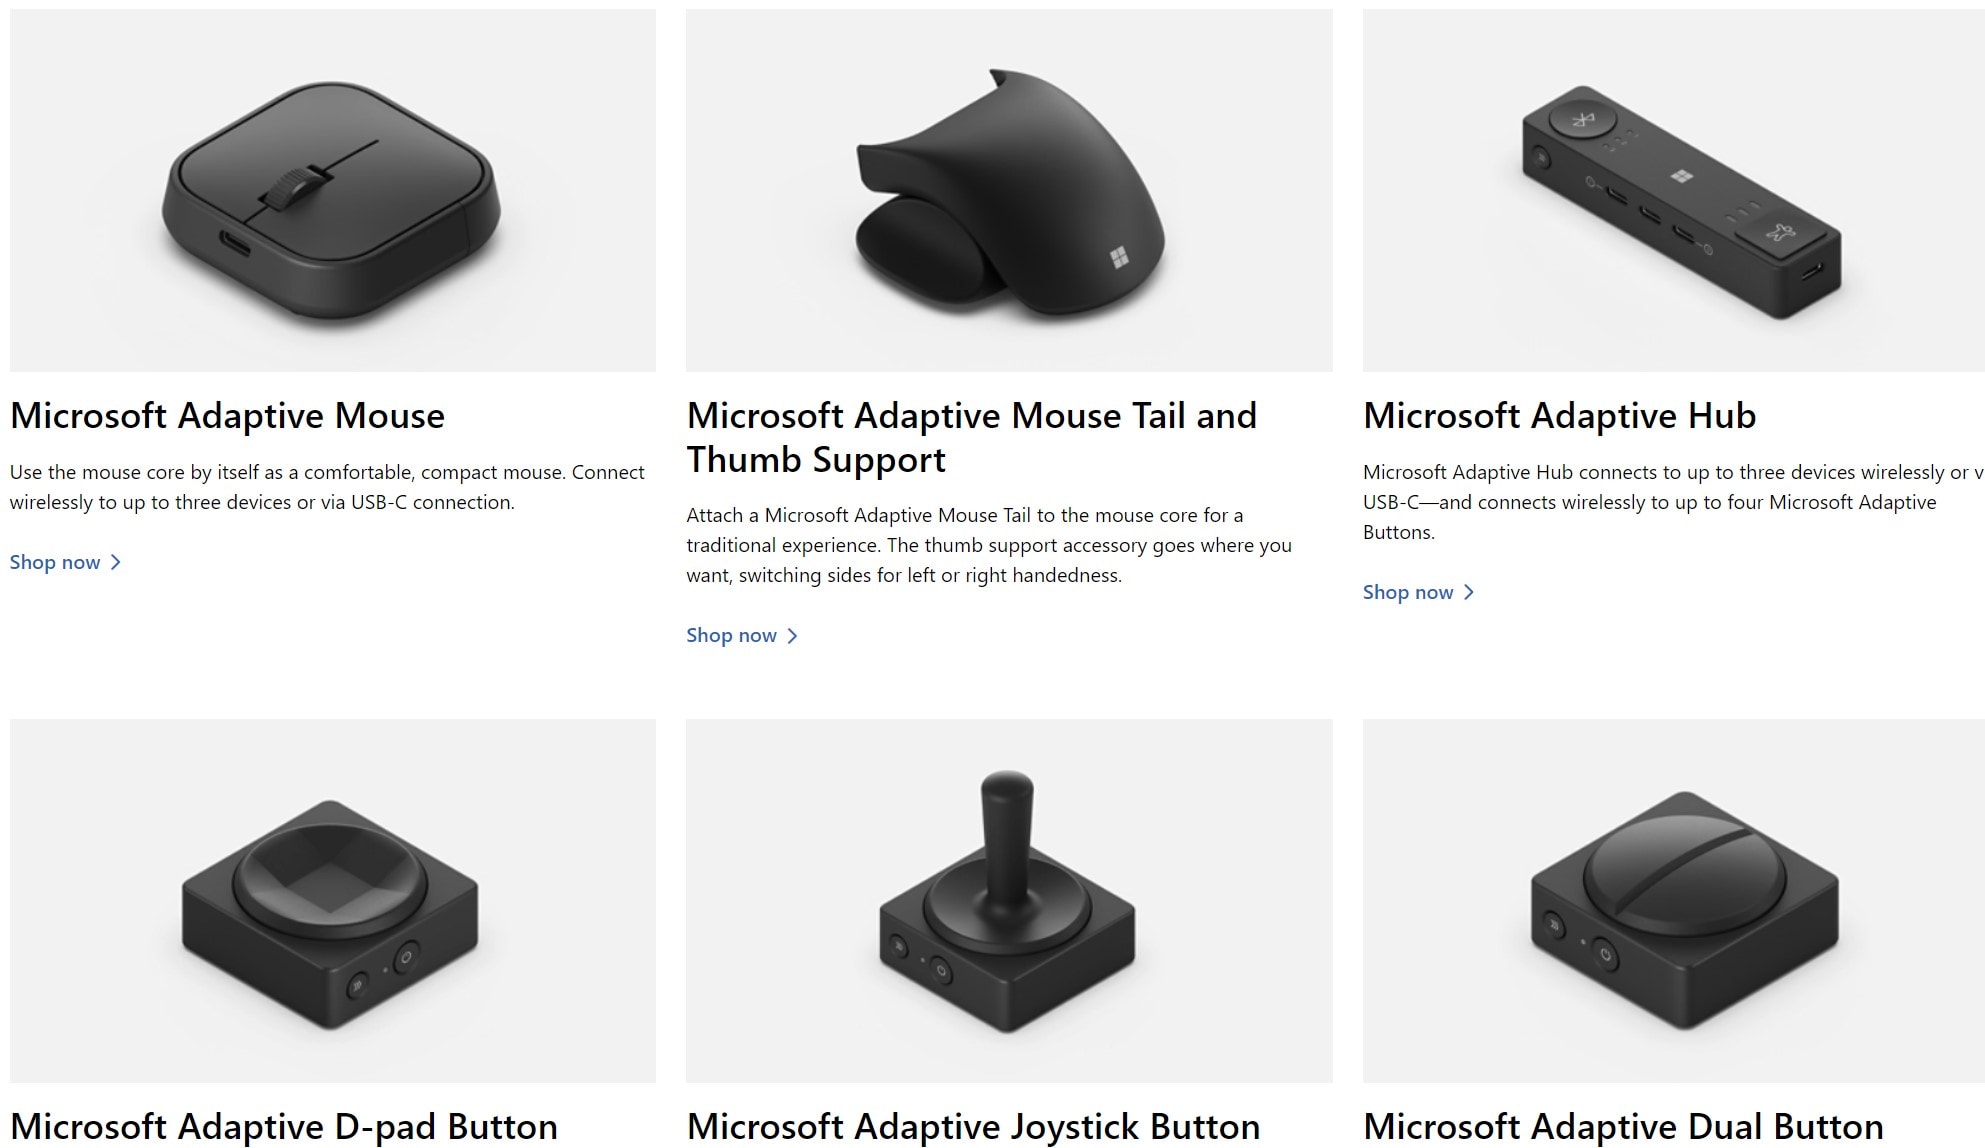 New computer accessories from Microsoft